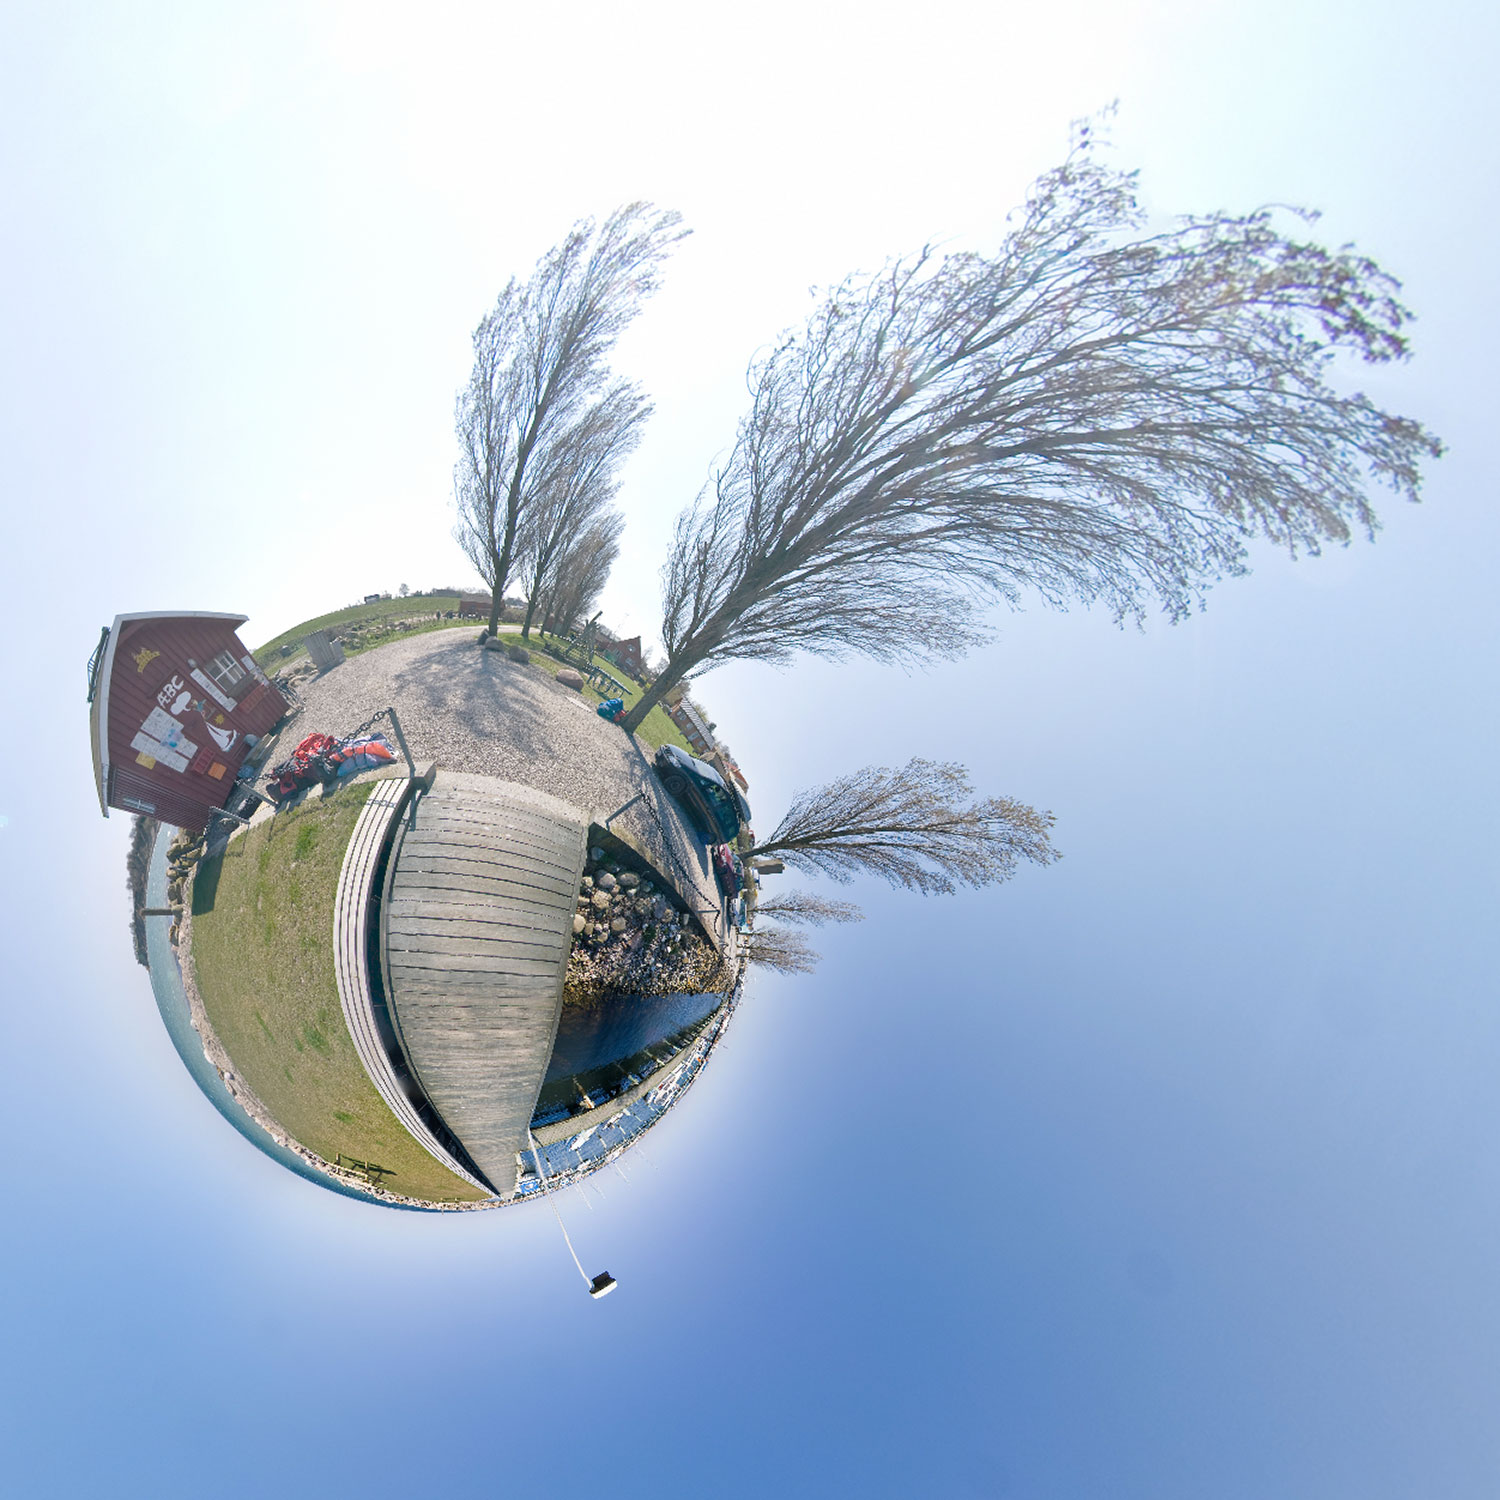 Panorama 033 - Little Planet